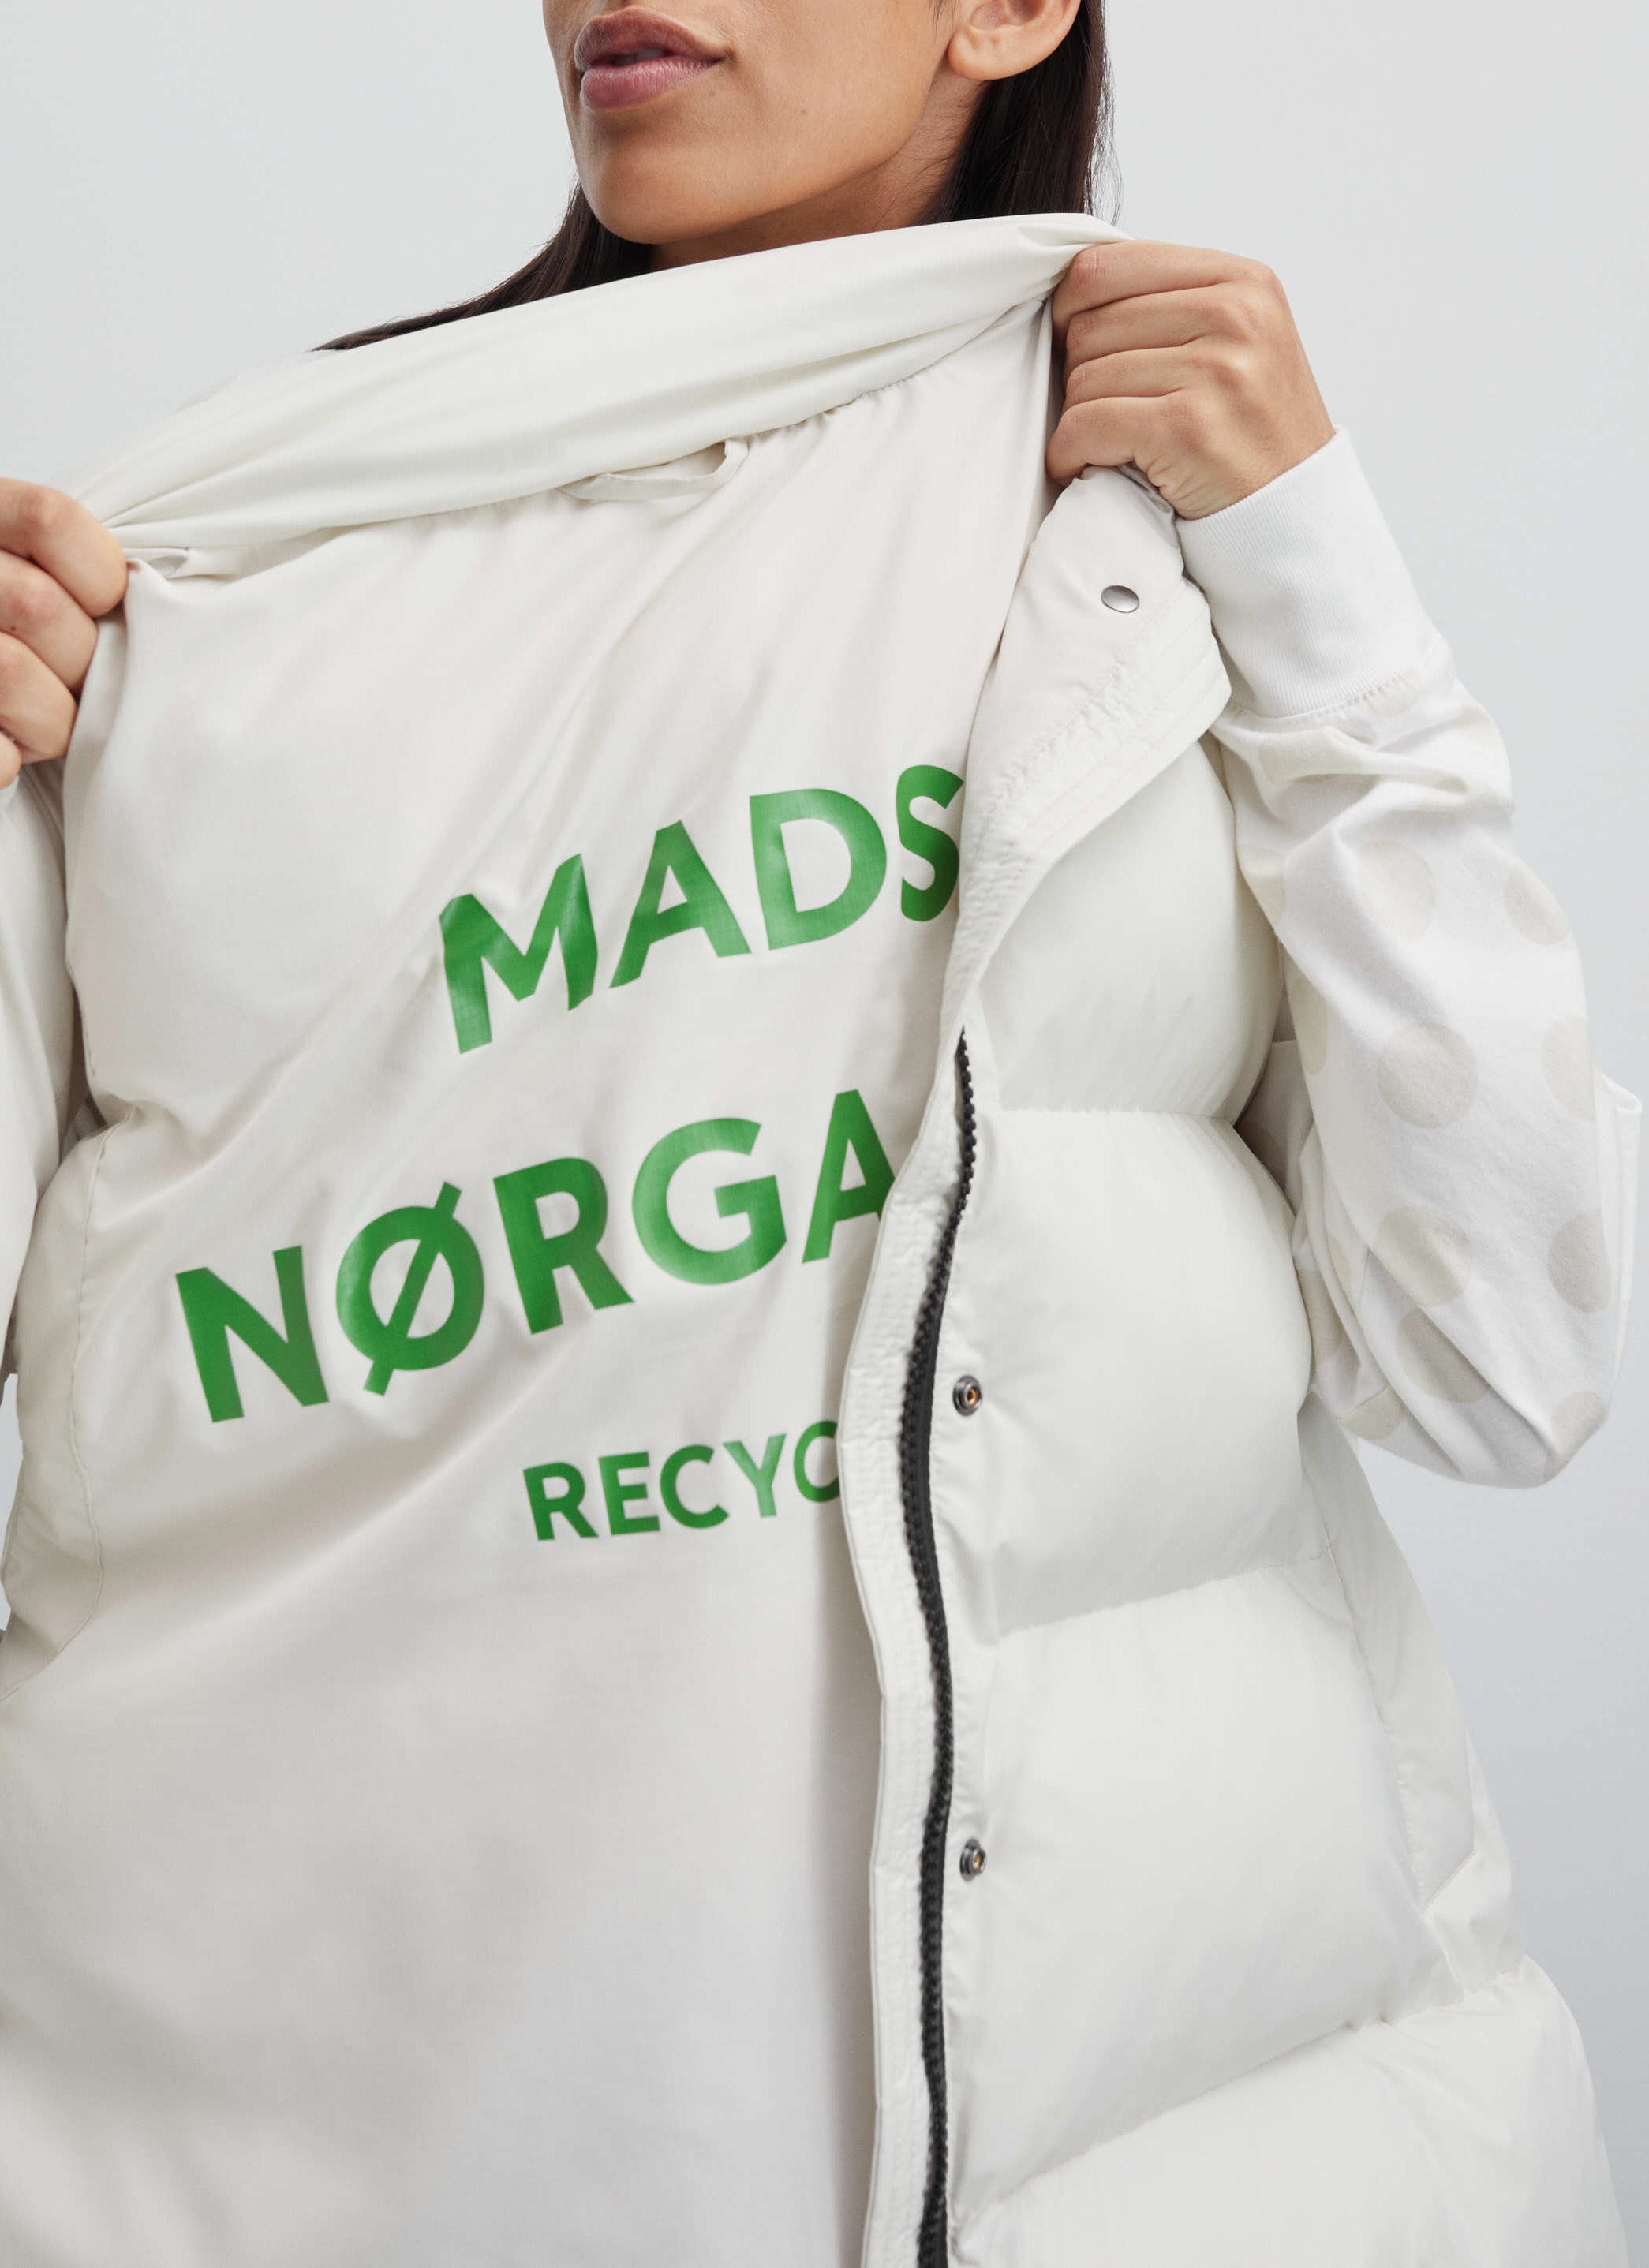 Mads Norgaard Recycle Jansy Vest - Silver Birch